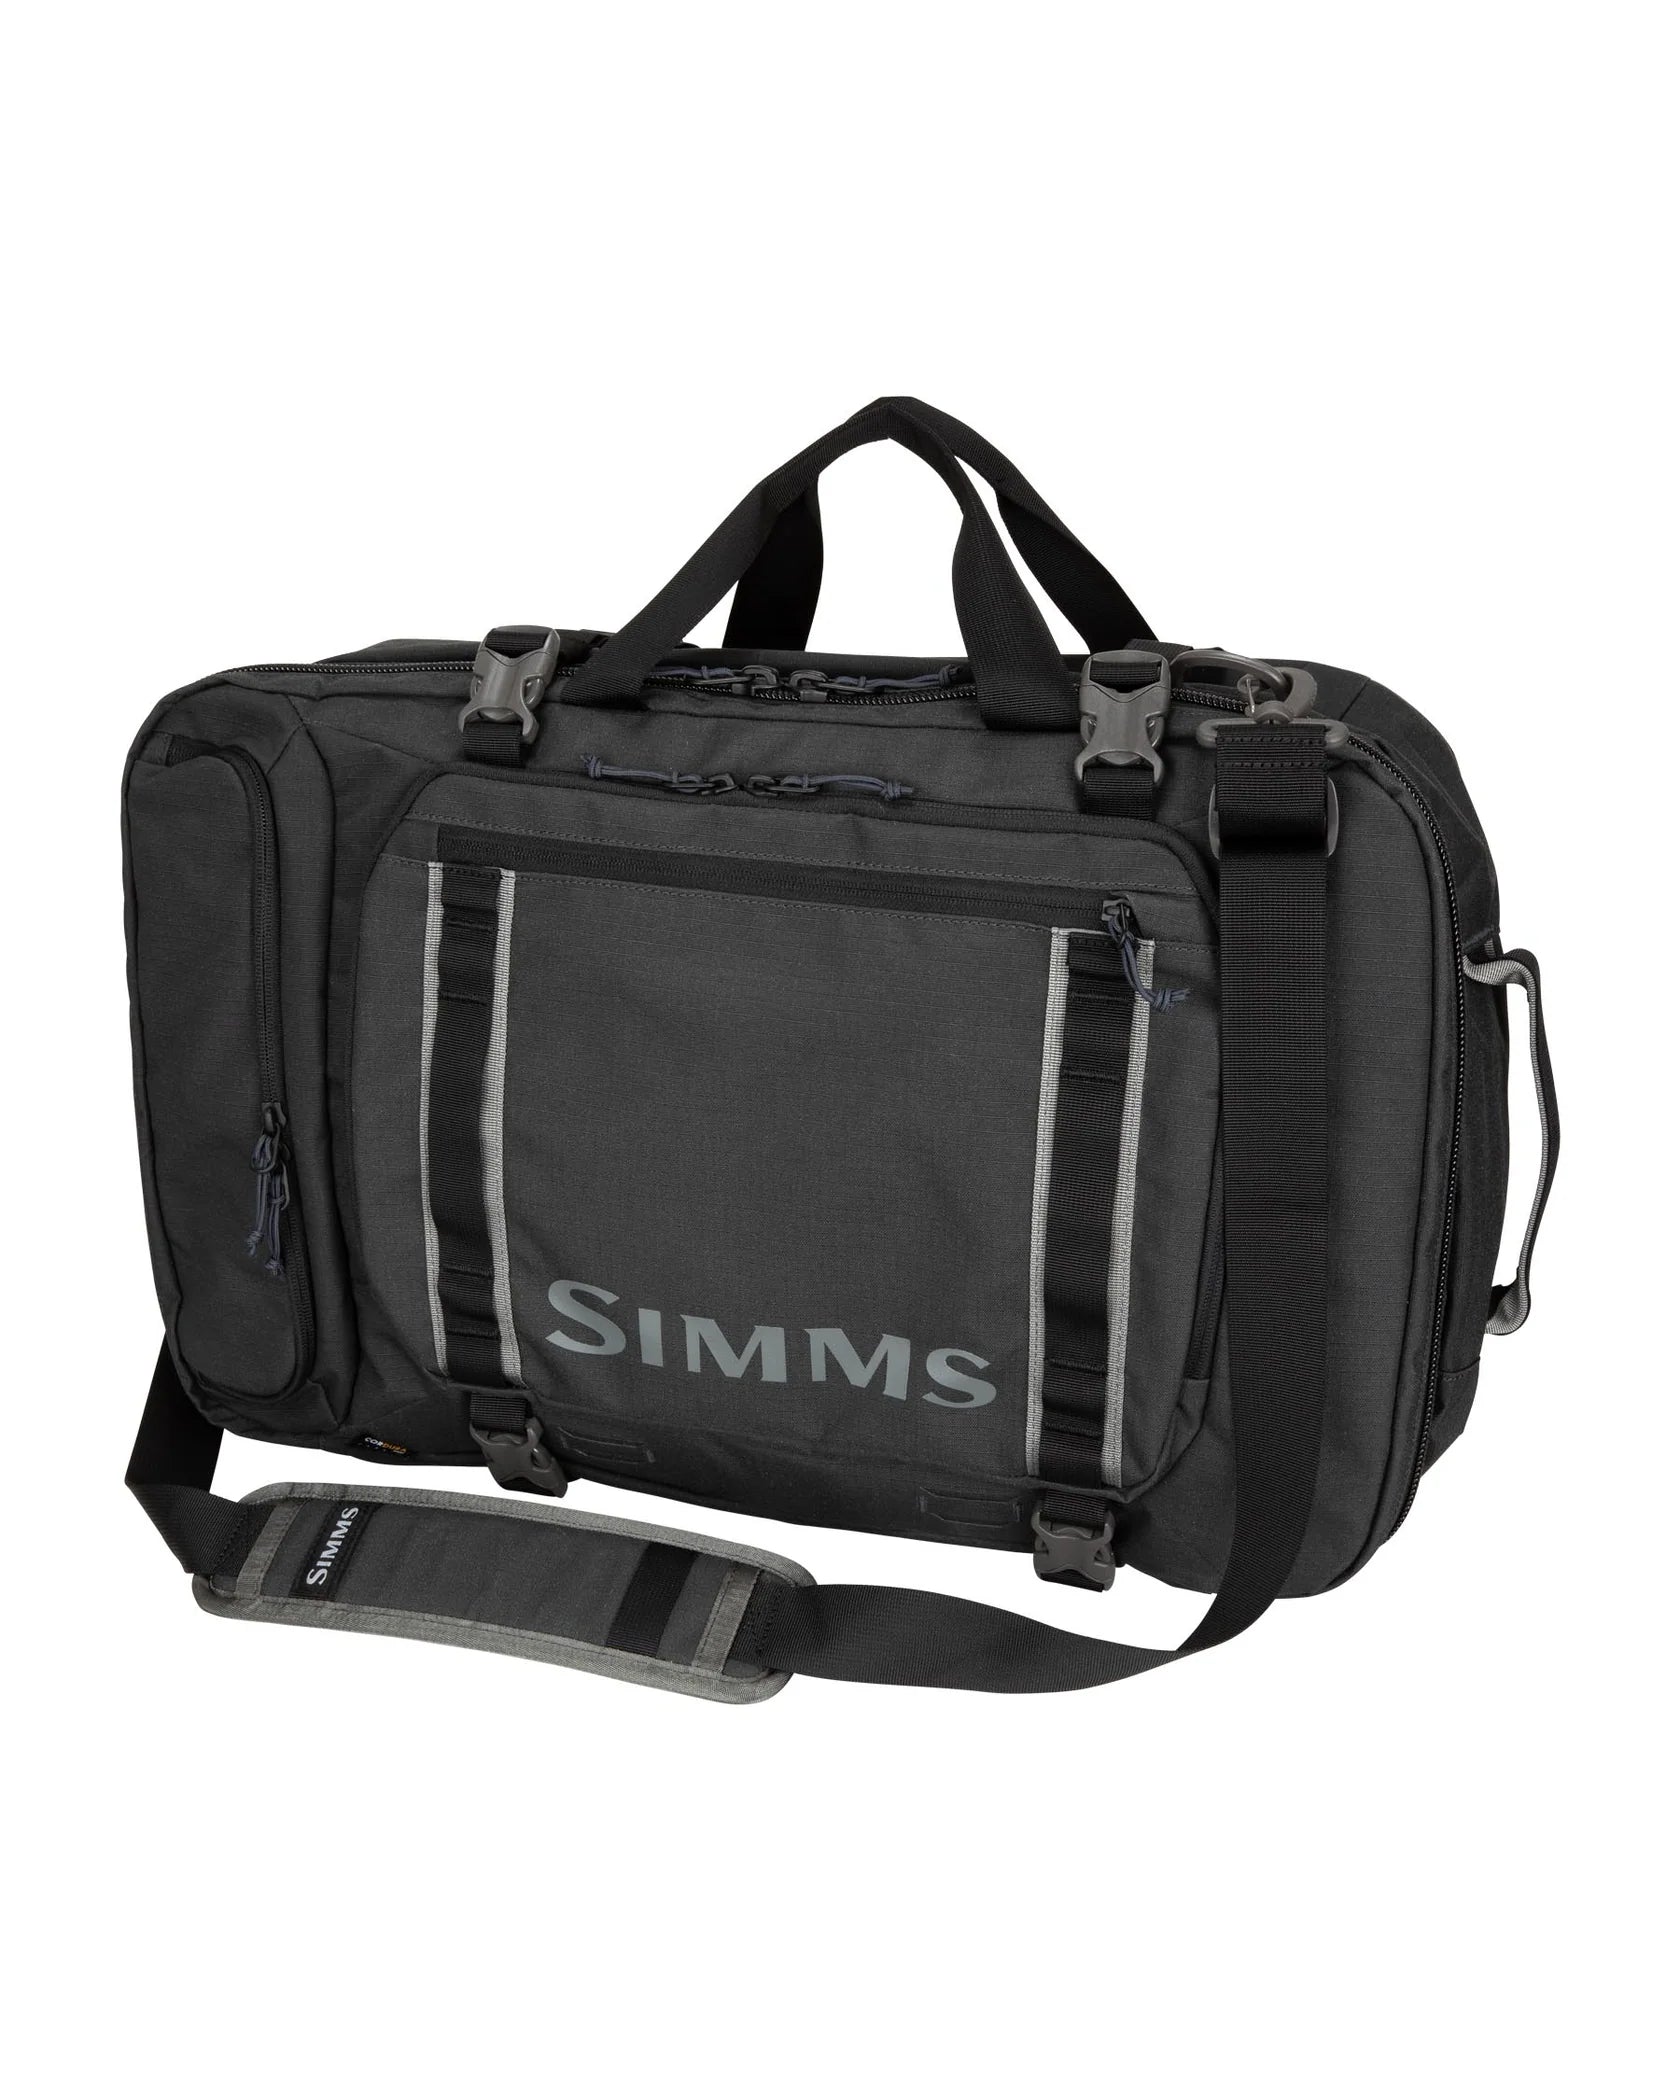 Simms GTS Double Rod Reel Case  Buy Simms Rod and Reel Cases